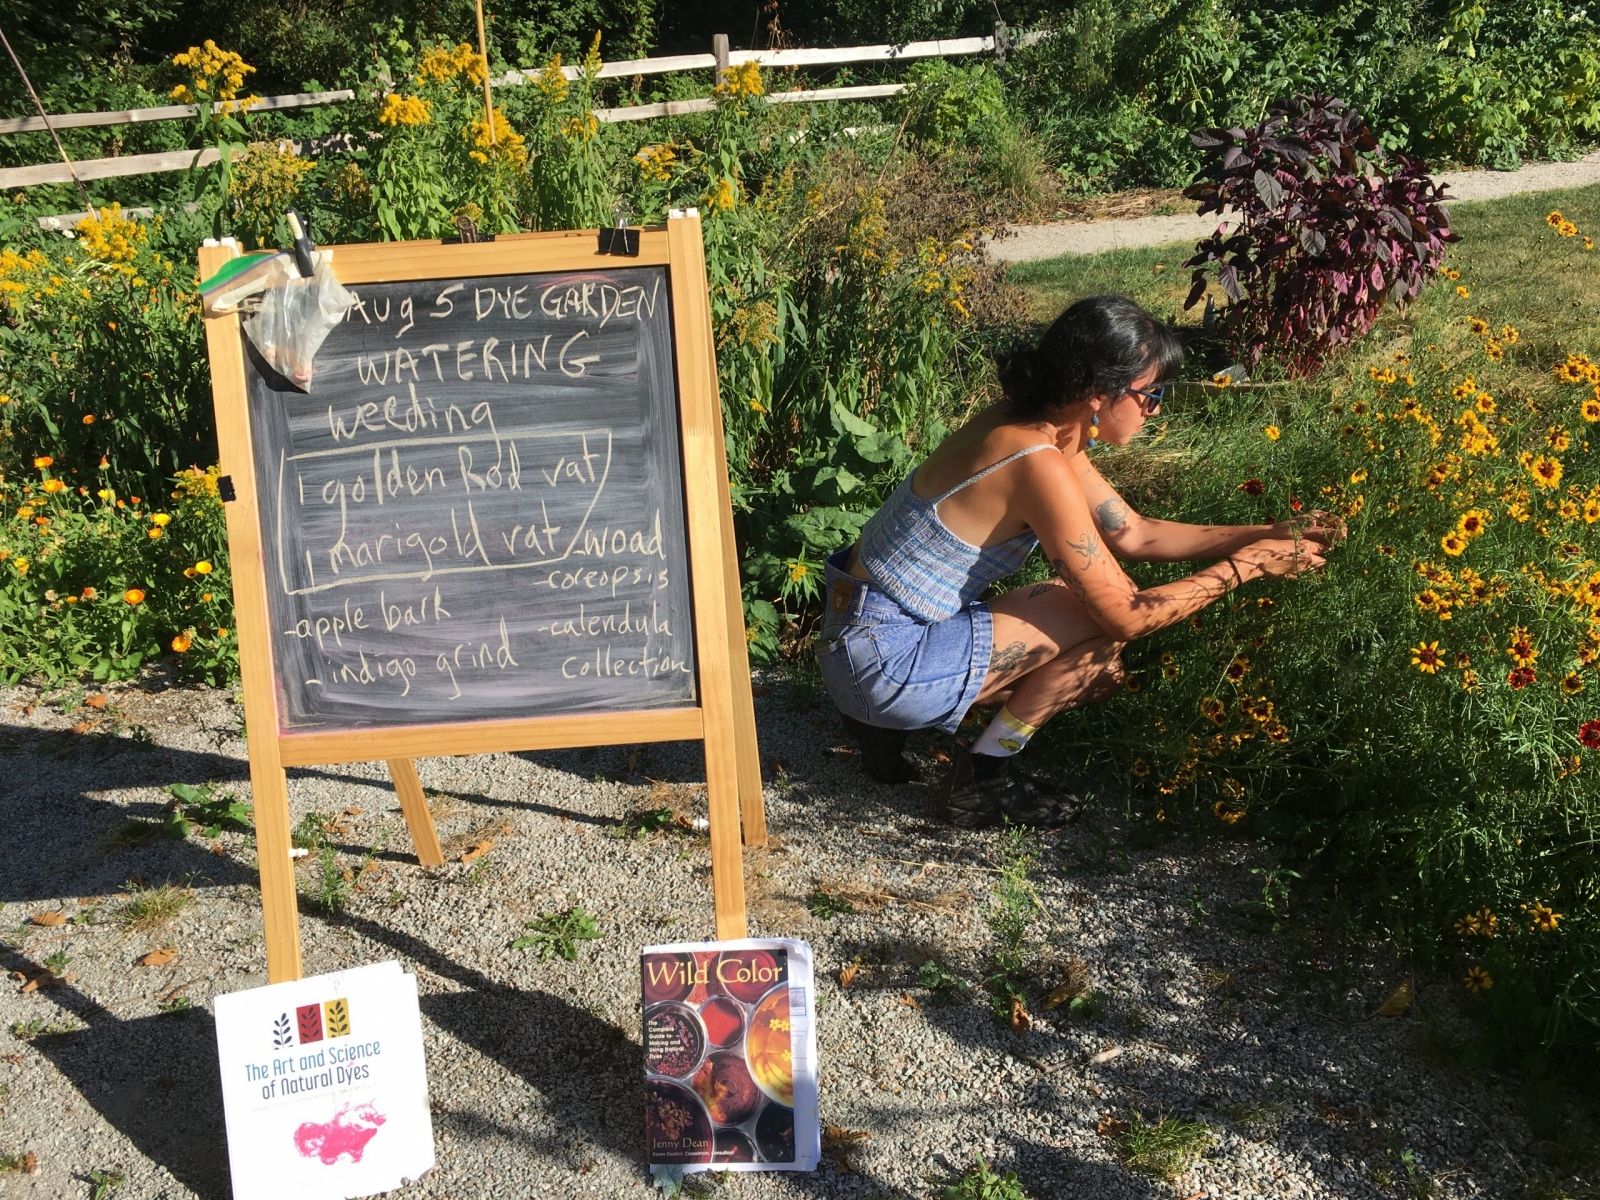 Harvesting coreopsis flowers in the Colour me Local Dye Garden in preparation for making a dye vat at the Gardeners’ Gathering, 2020. Credit: Carmen Rosen / Still Moon Arts Society